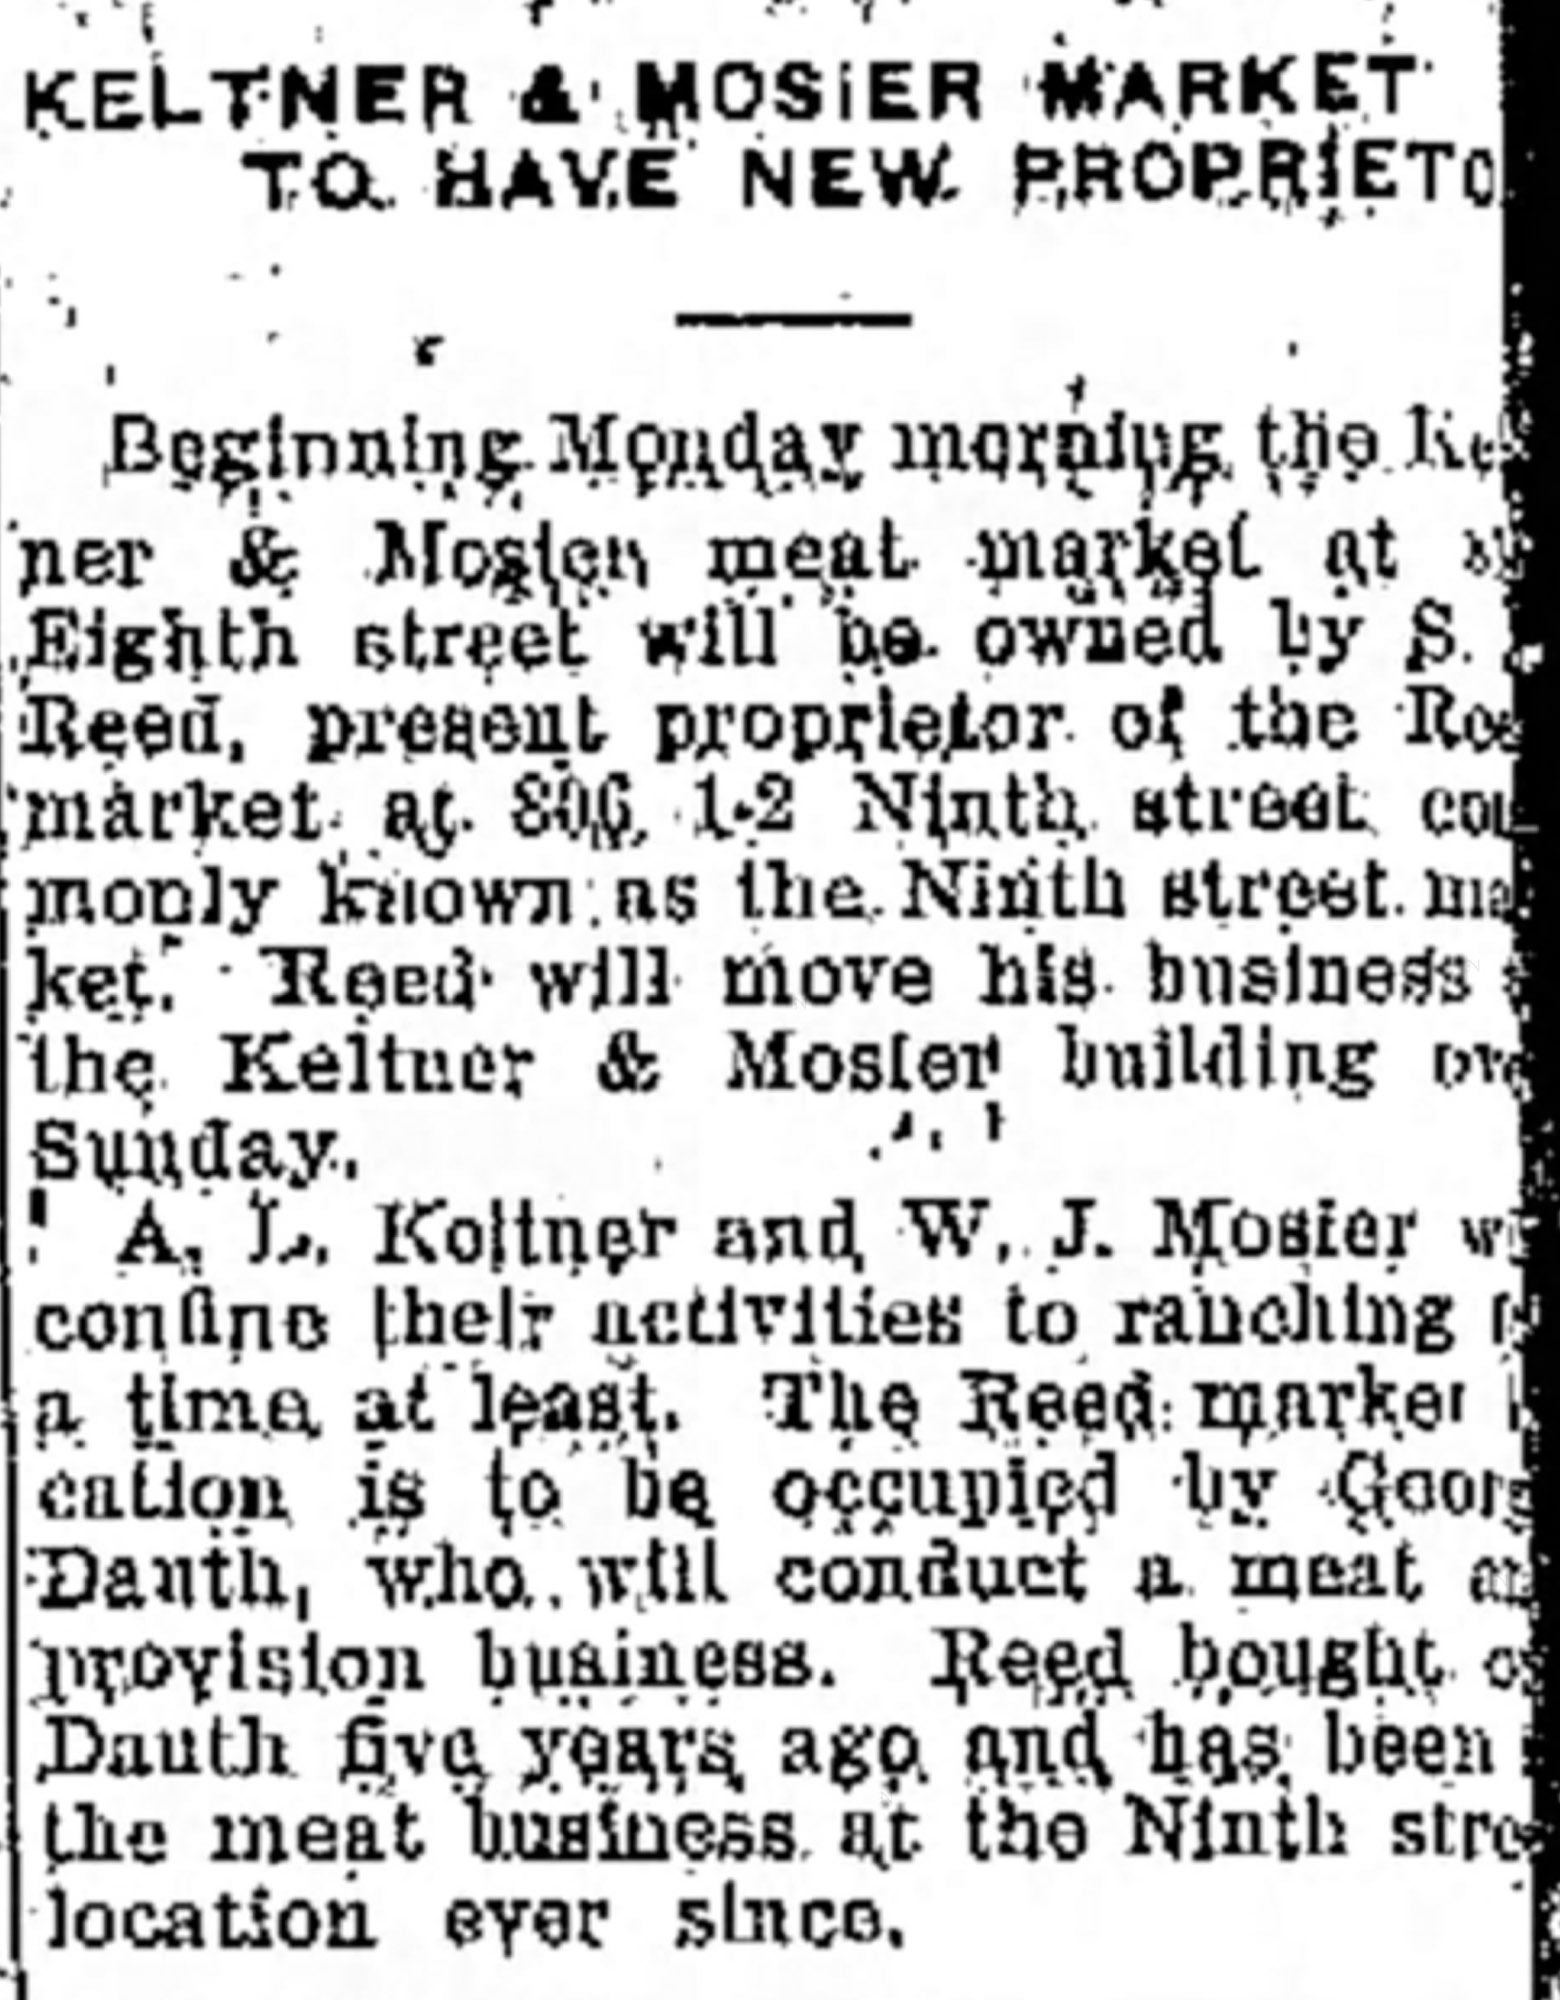 Dauth Family Archive - 1918-04-06 - Greeley Daily Tribune - George Dauth Buys Back Store